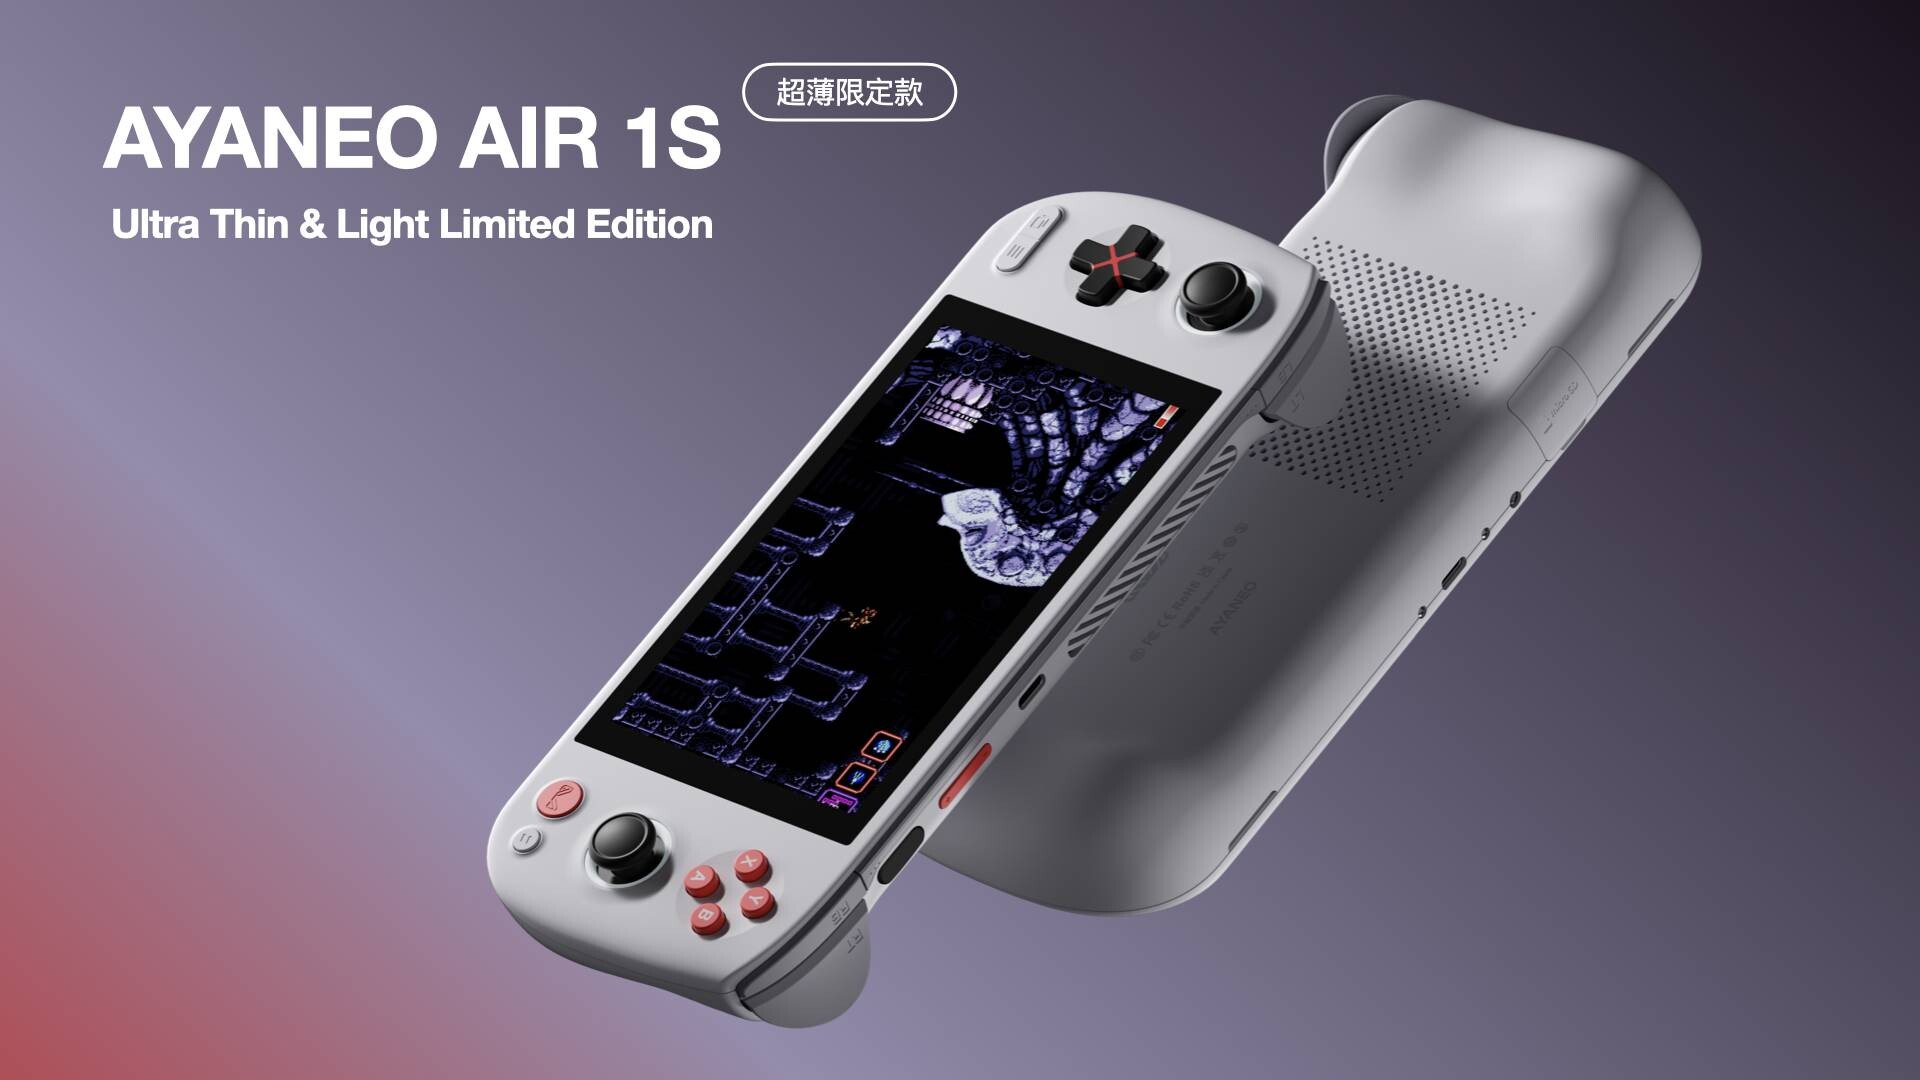 AYANEO AIR 1S: Pricing, specifications and launch date confirmed 